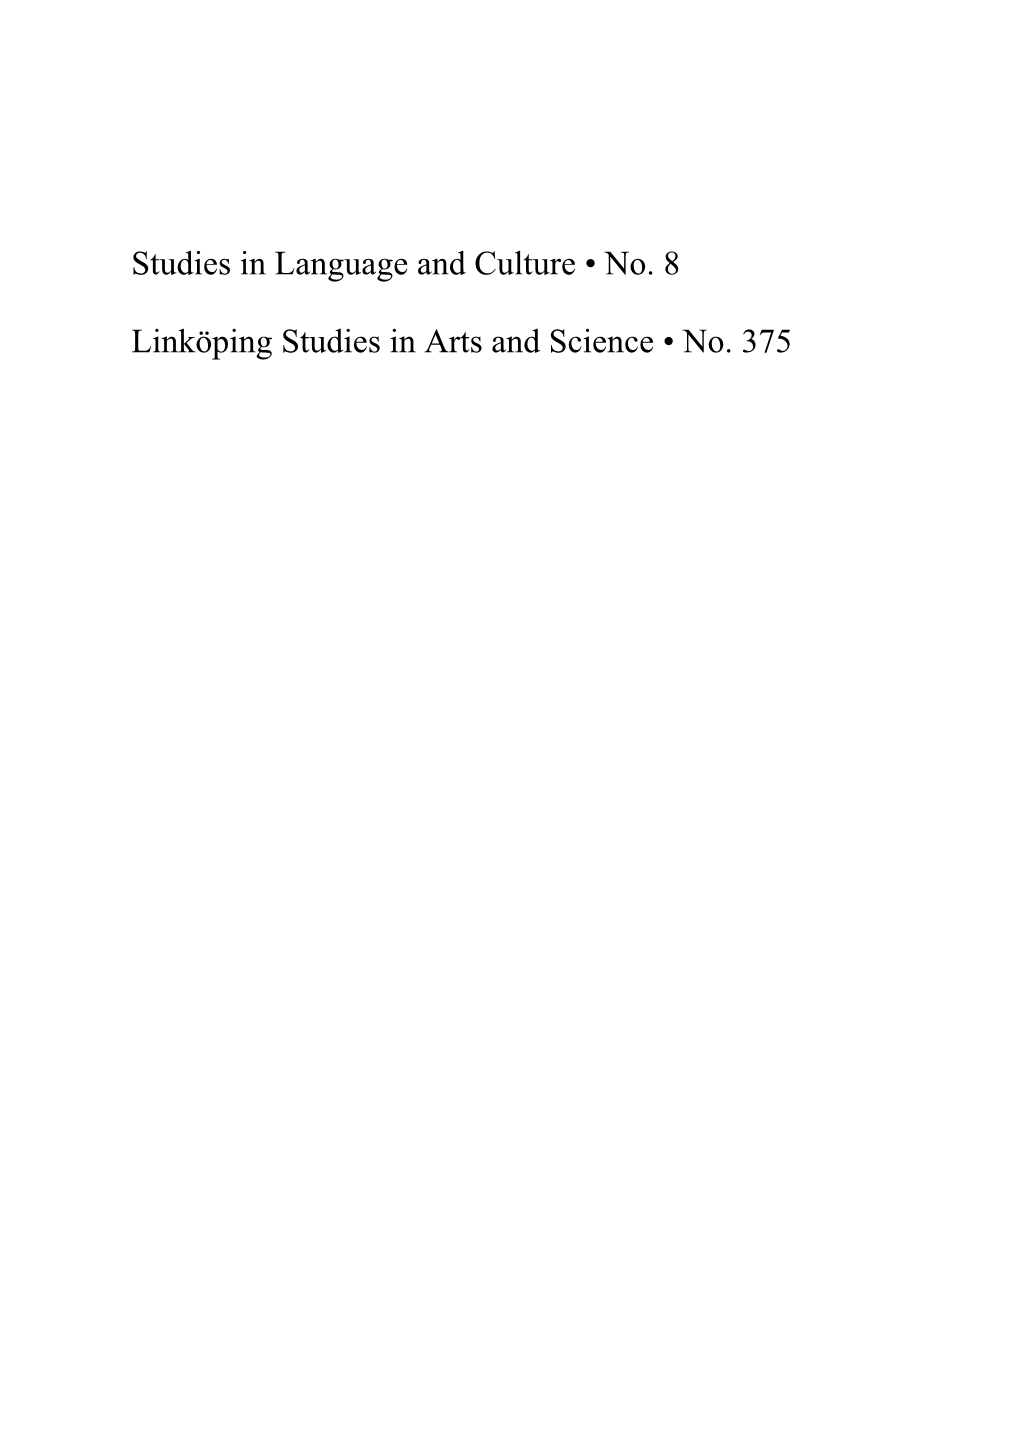 Studies in Language and Culture • No. 8 Linköping Studies in Arts and Science • No